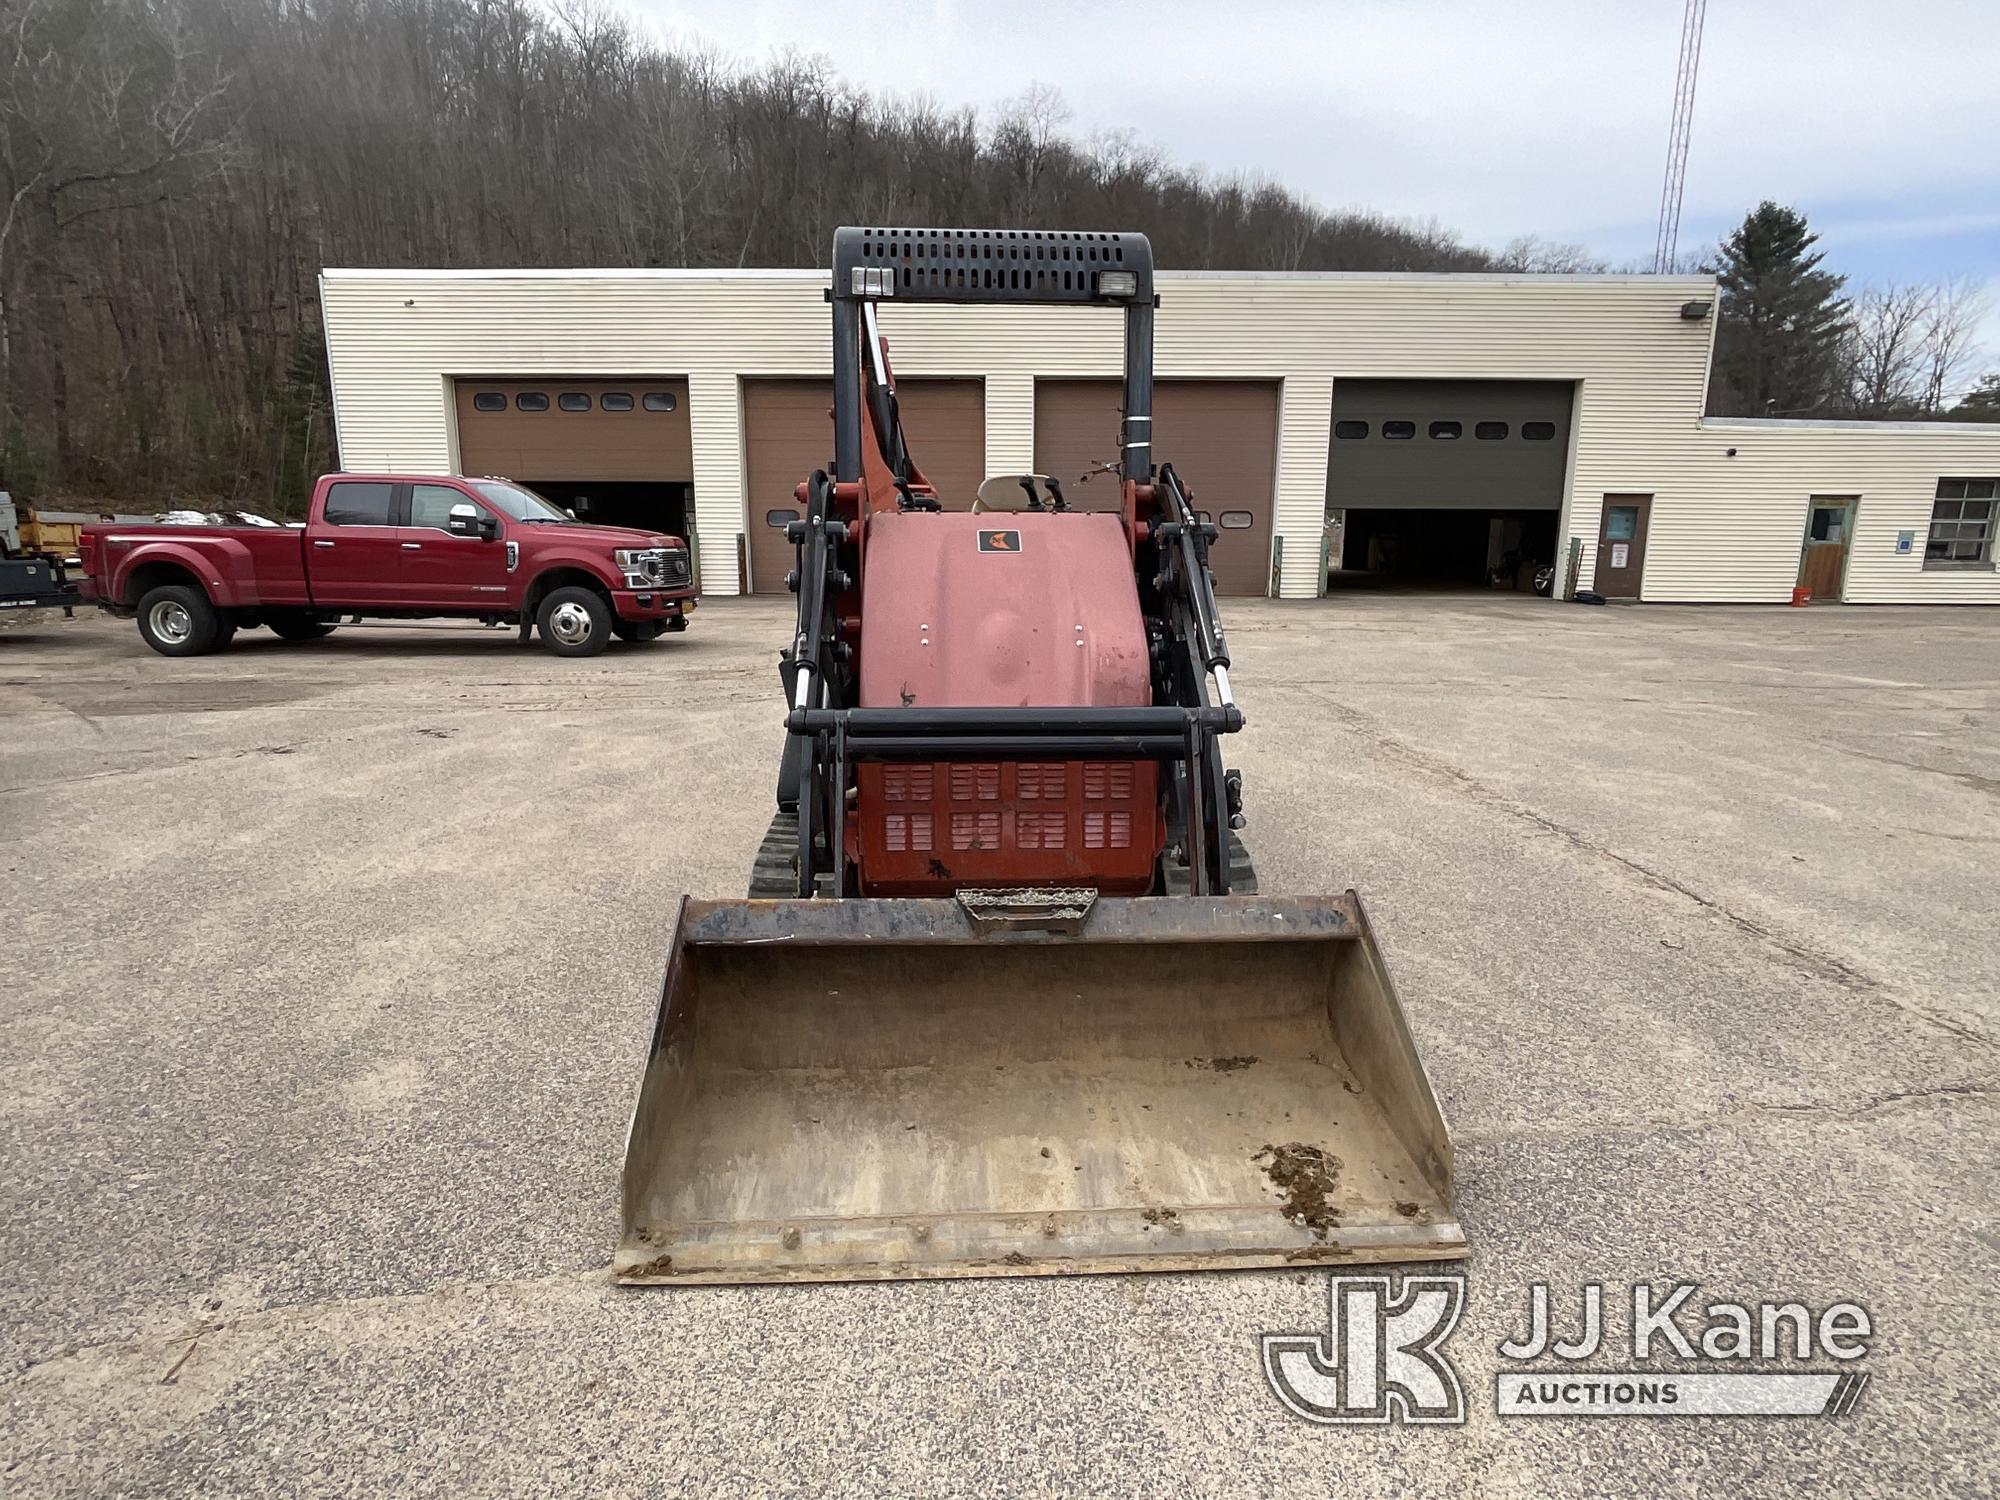 (Saint Regis Falls, NY) 2011 Ditch Witch XT1600 Crawler Loader Backhoe, To Be Sold With Lot# t3685 (